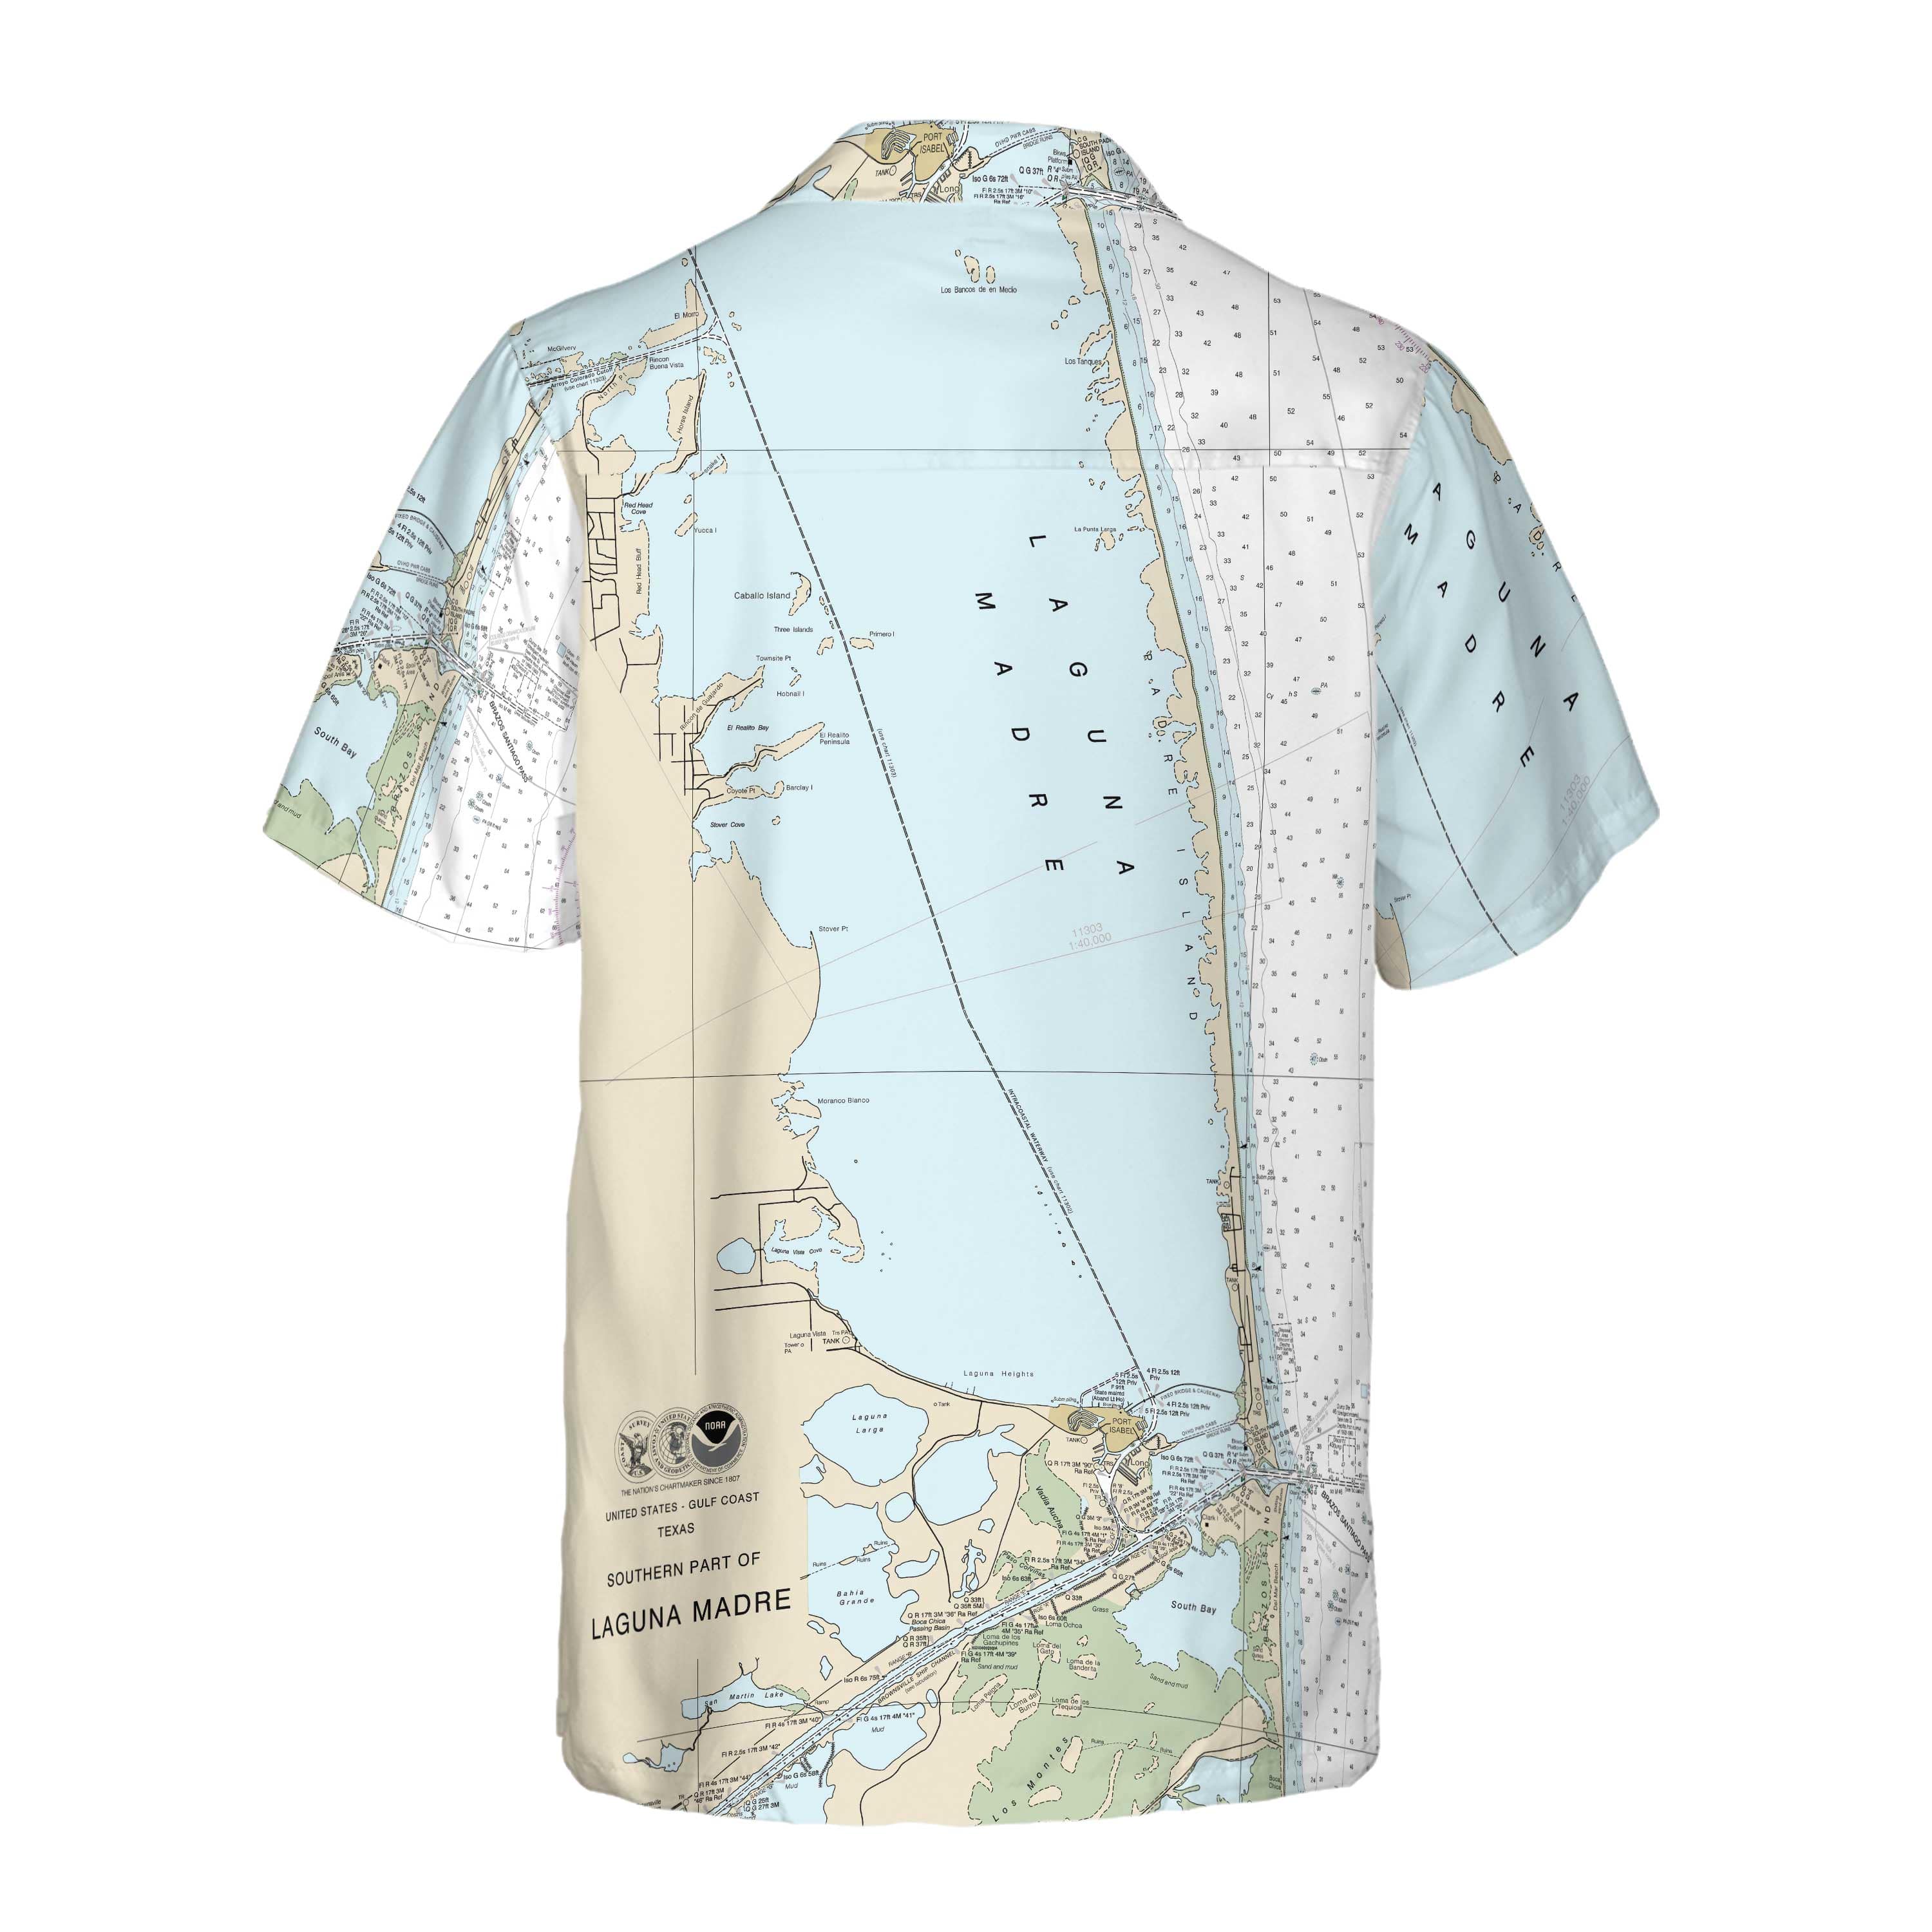 The Southern Laguna Madre Coconut Button Camp Shirt